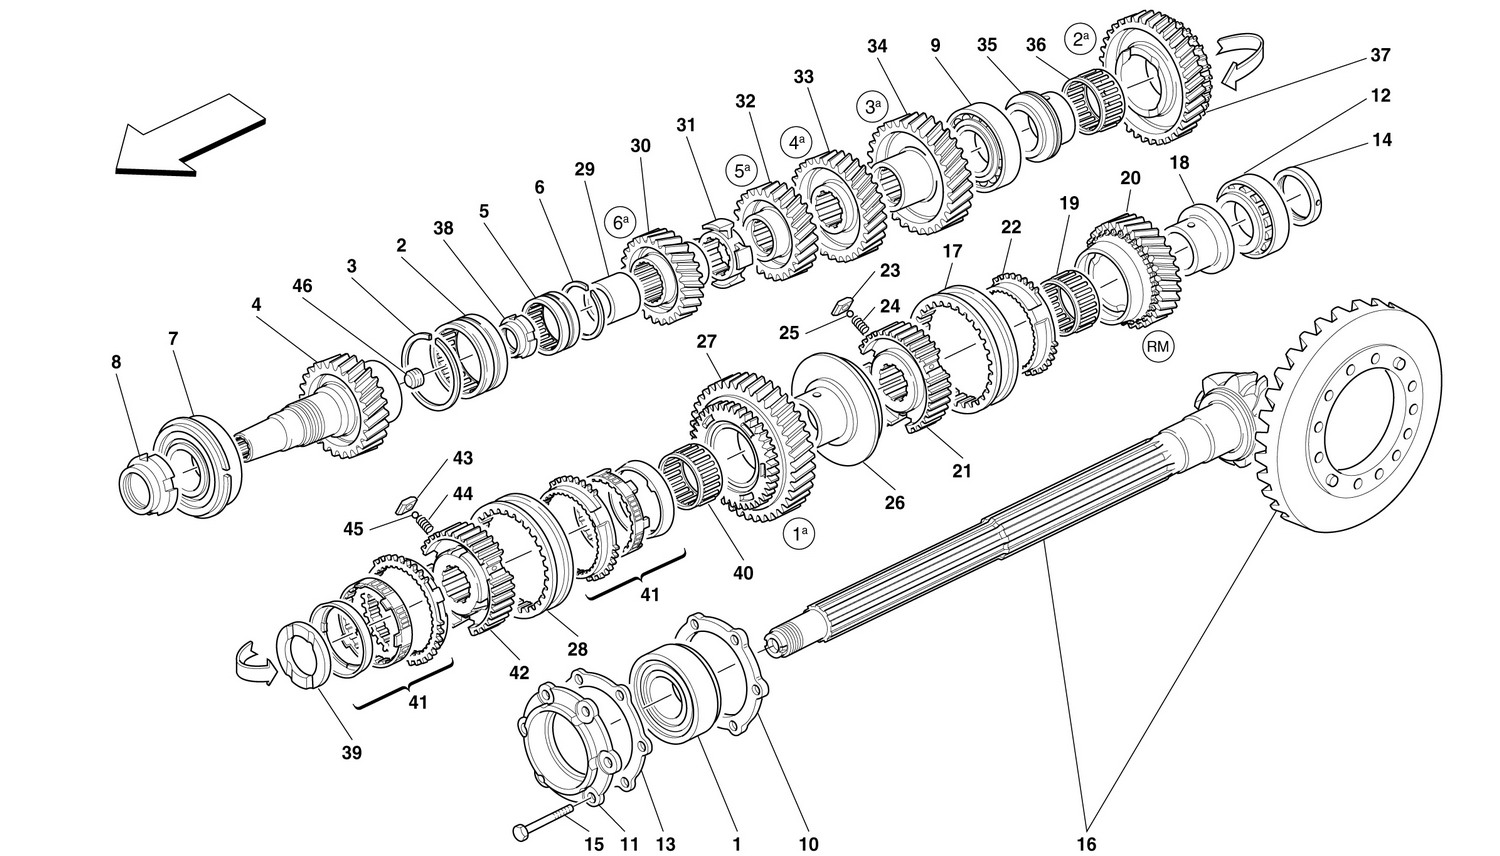 Schematic: Lay Shaft Gears -Not For 456 Gta